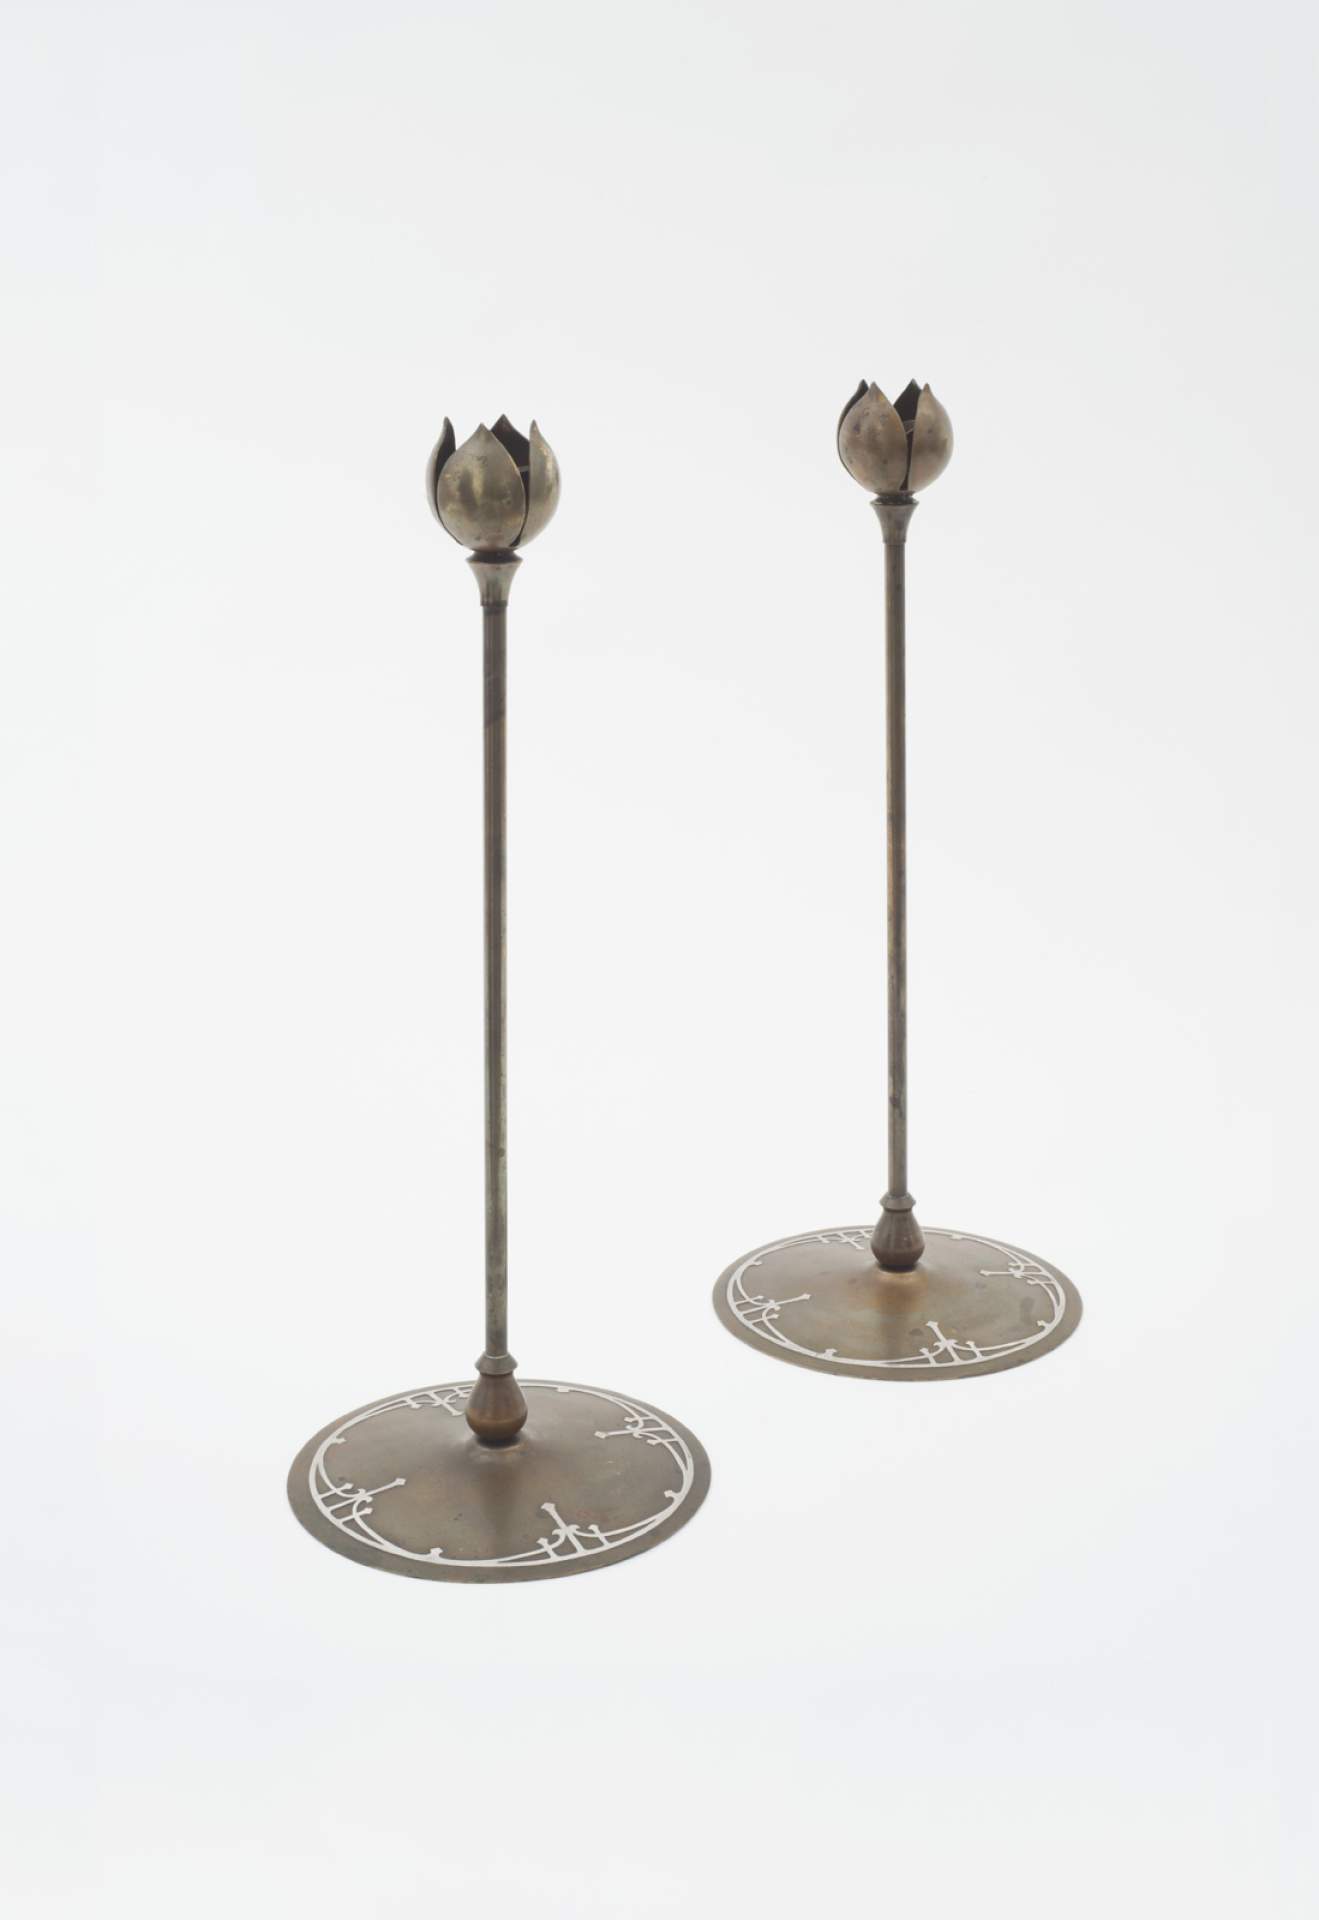 Pair of Candlestick Holders